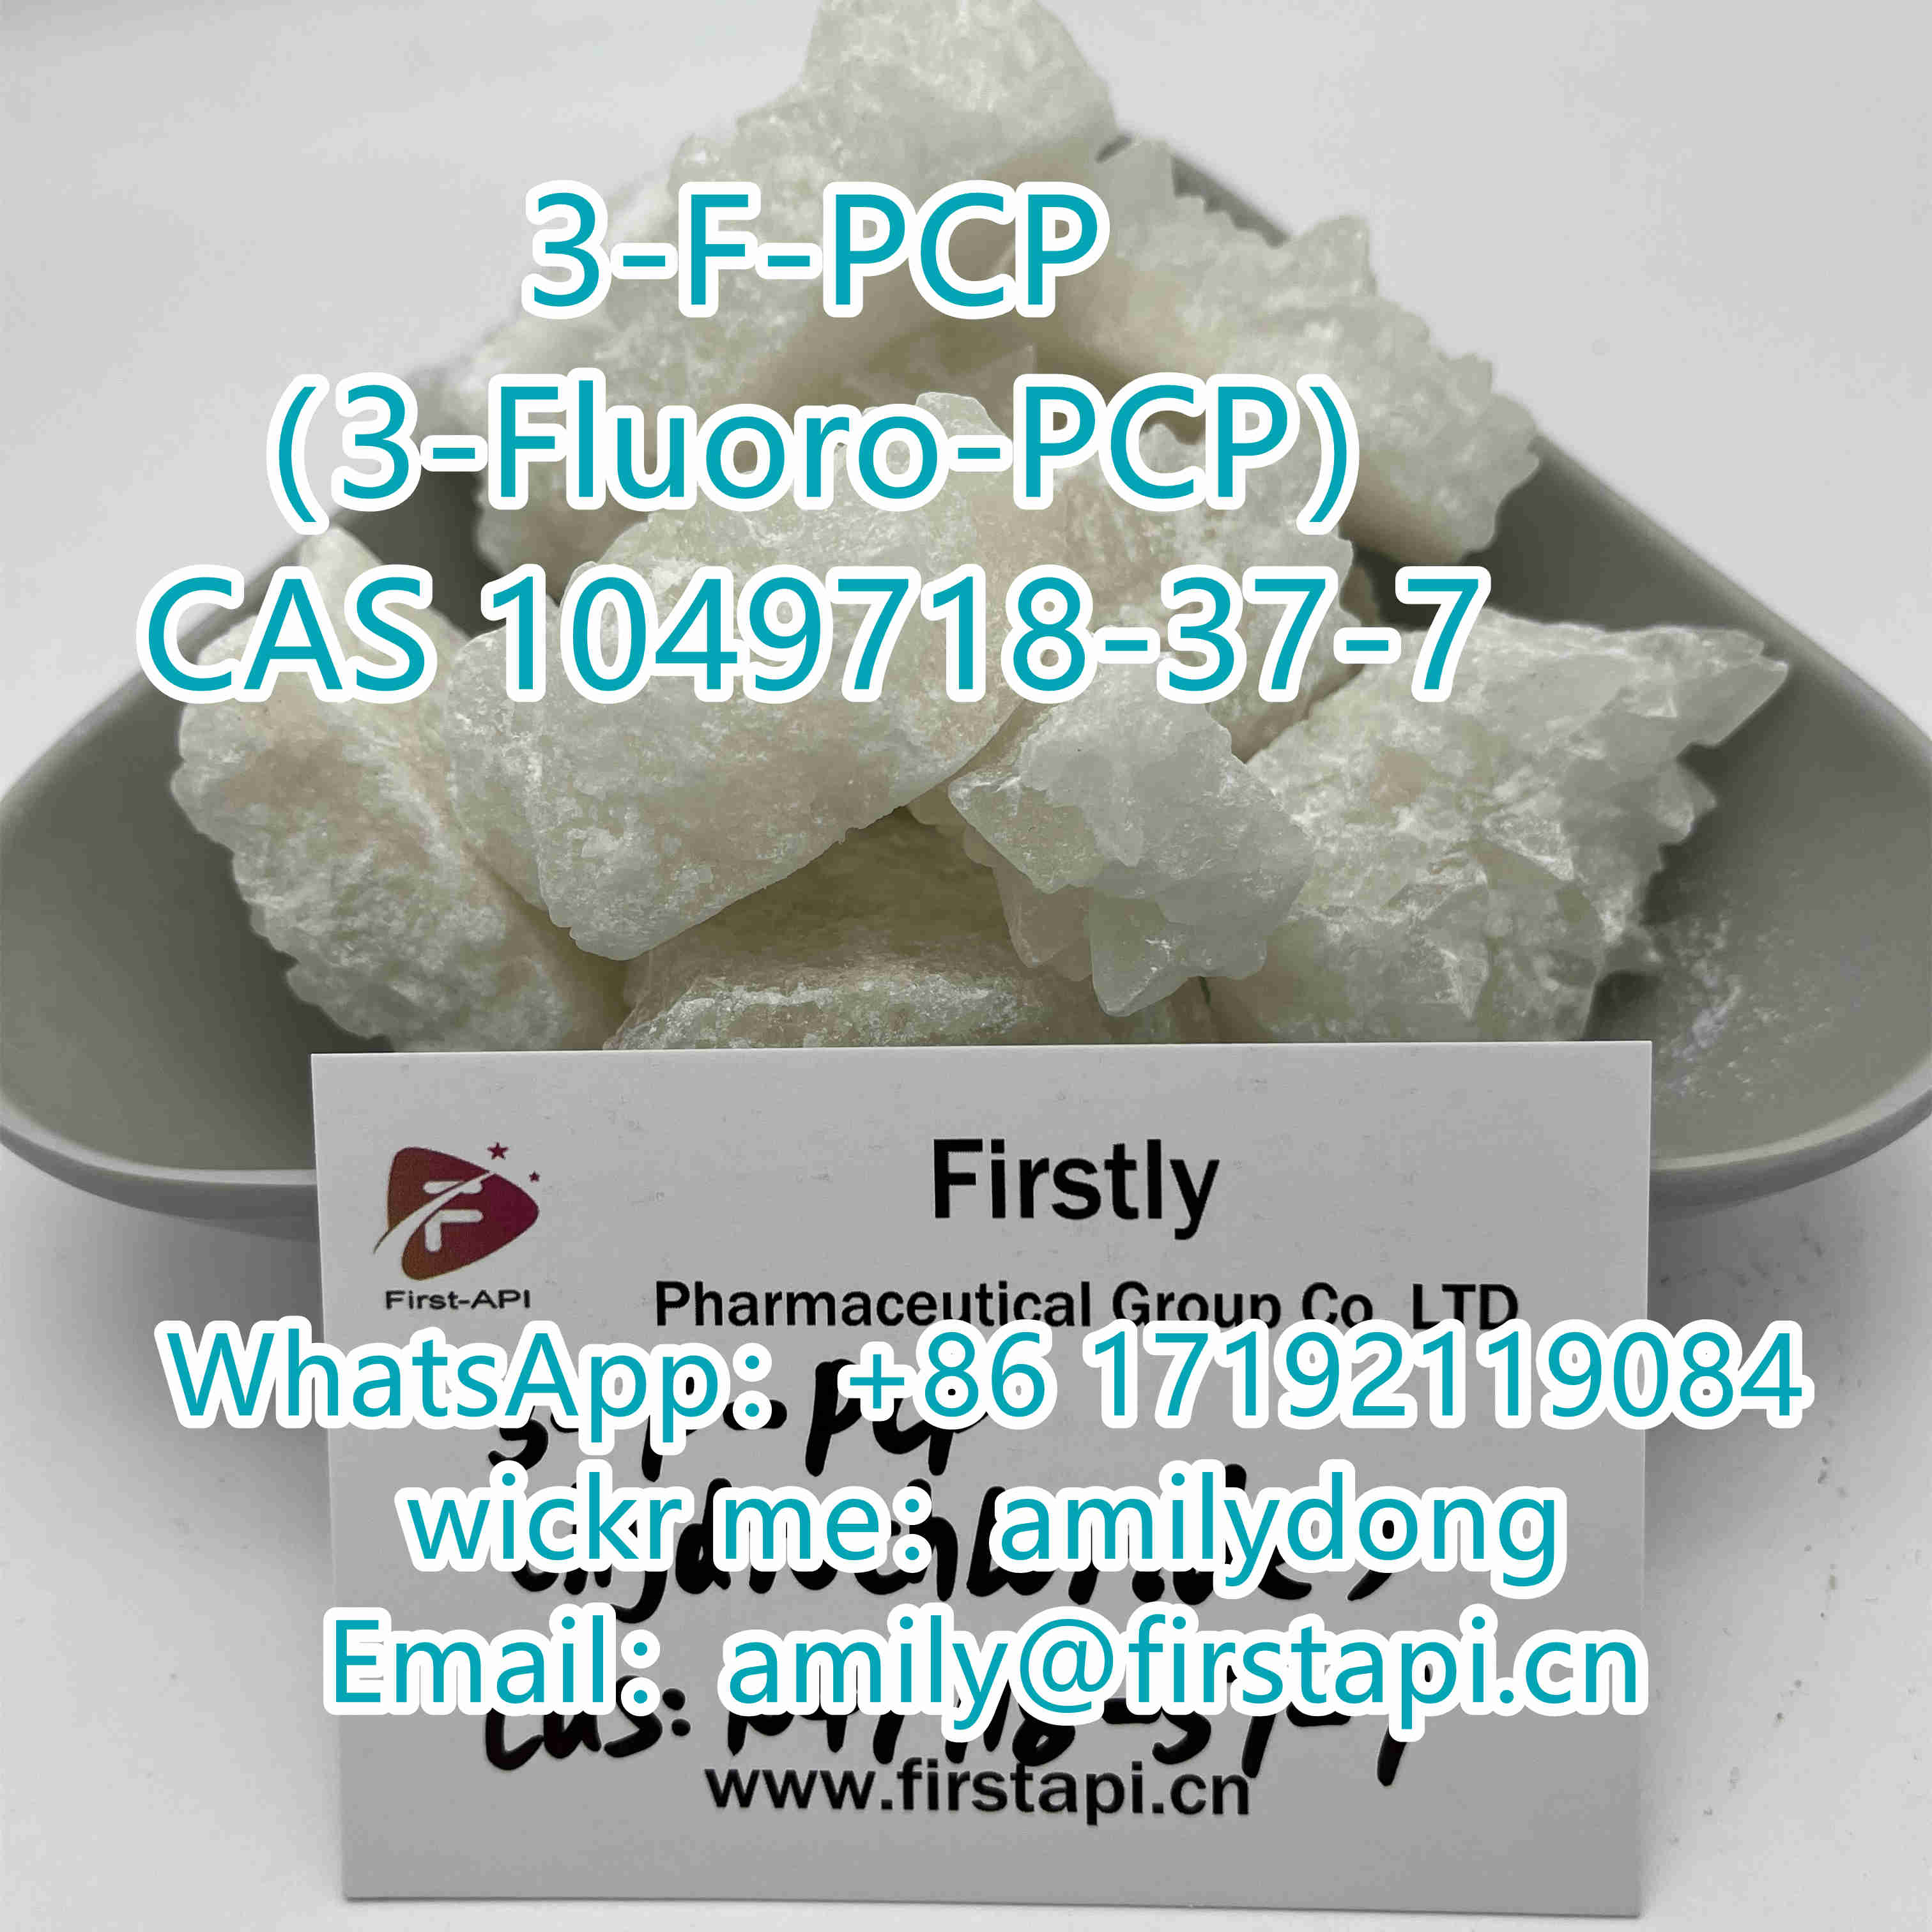 3-F-PCP Chinese manufacturers （3-Fluoro-PCP）CAS 1049718-37-7 - photo